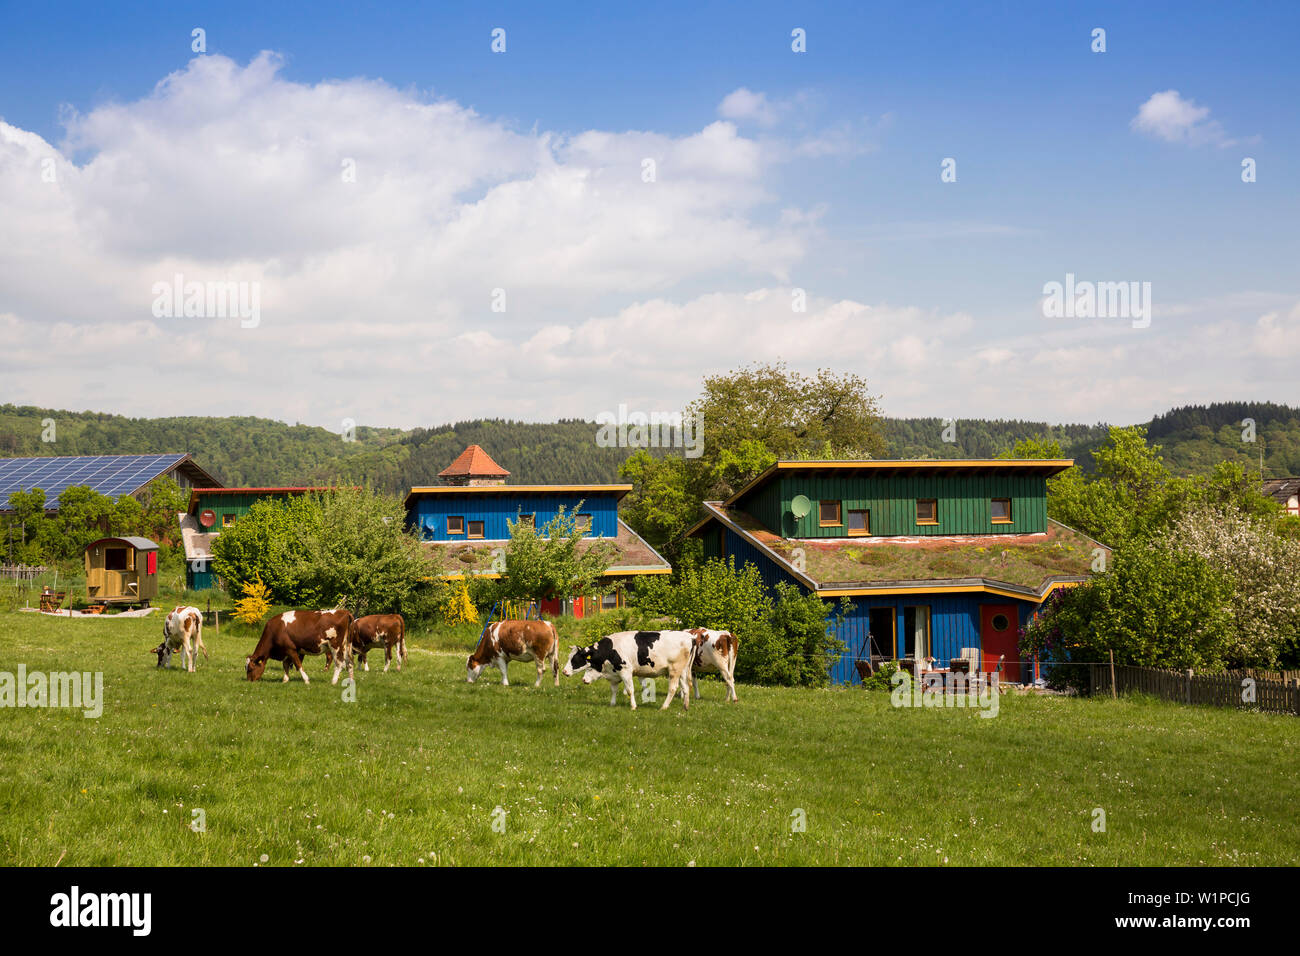 Holiday house Schoeneweiss with friendly cows grazing in a field, Voehl, Hesse, Germany, Europe Stock Photo